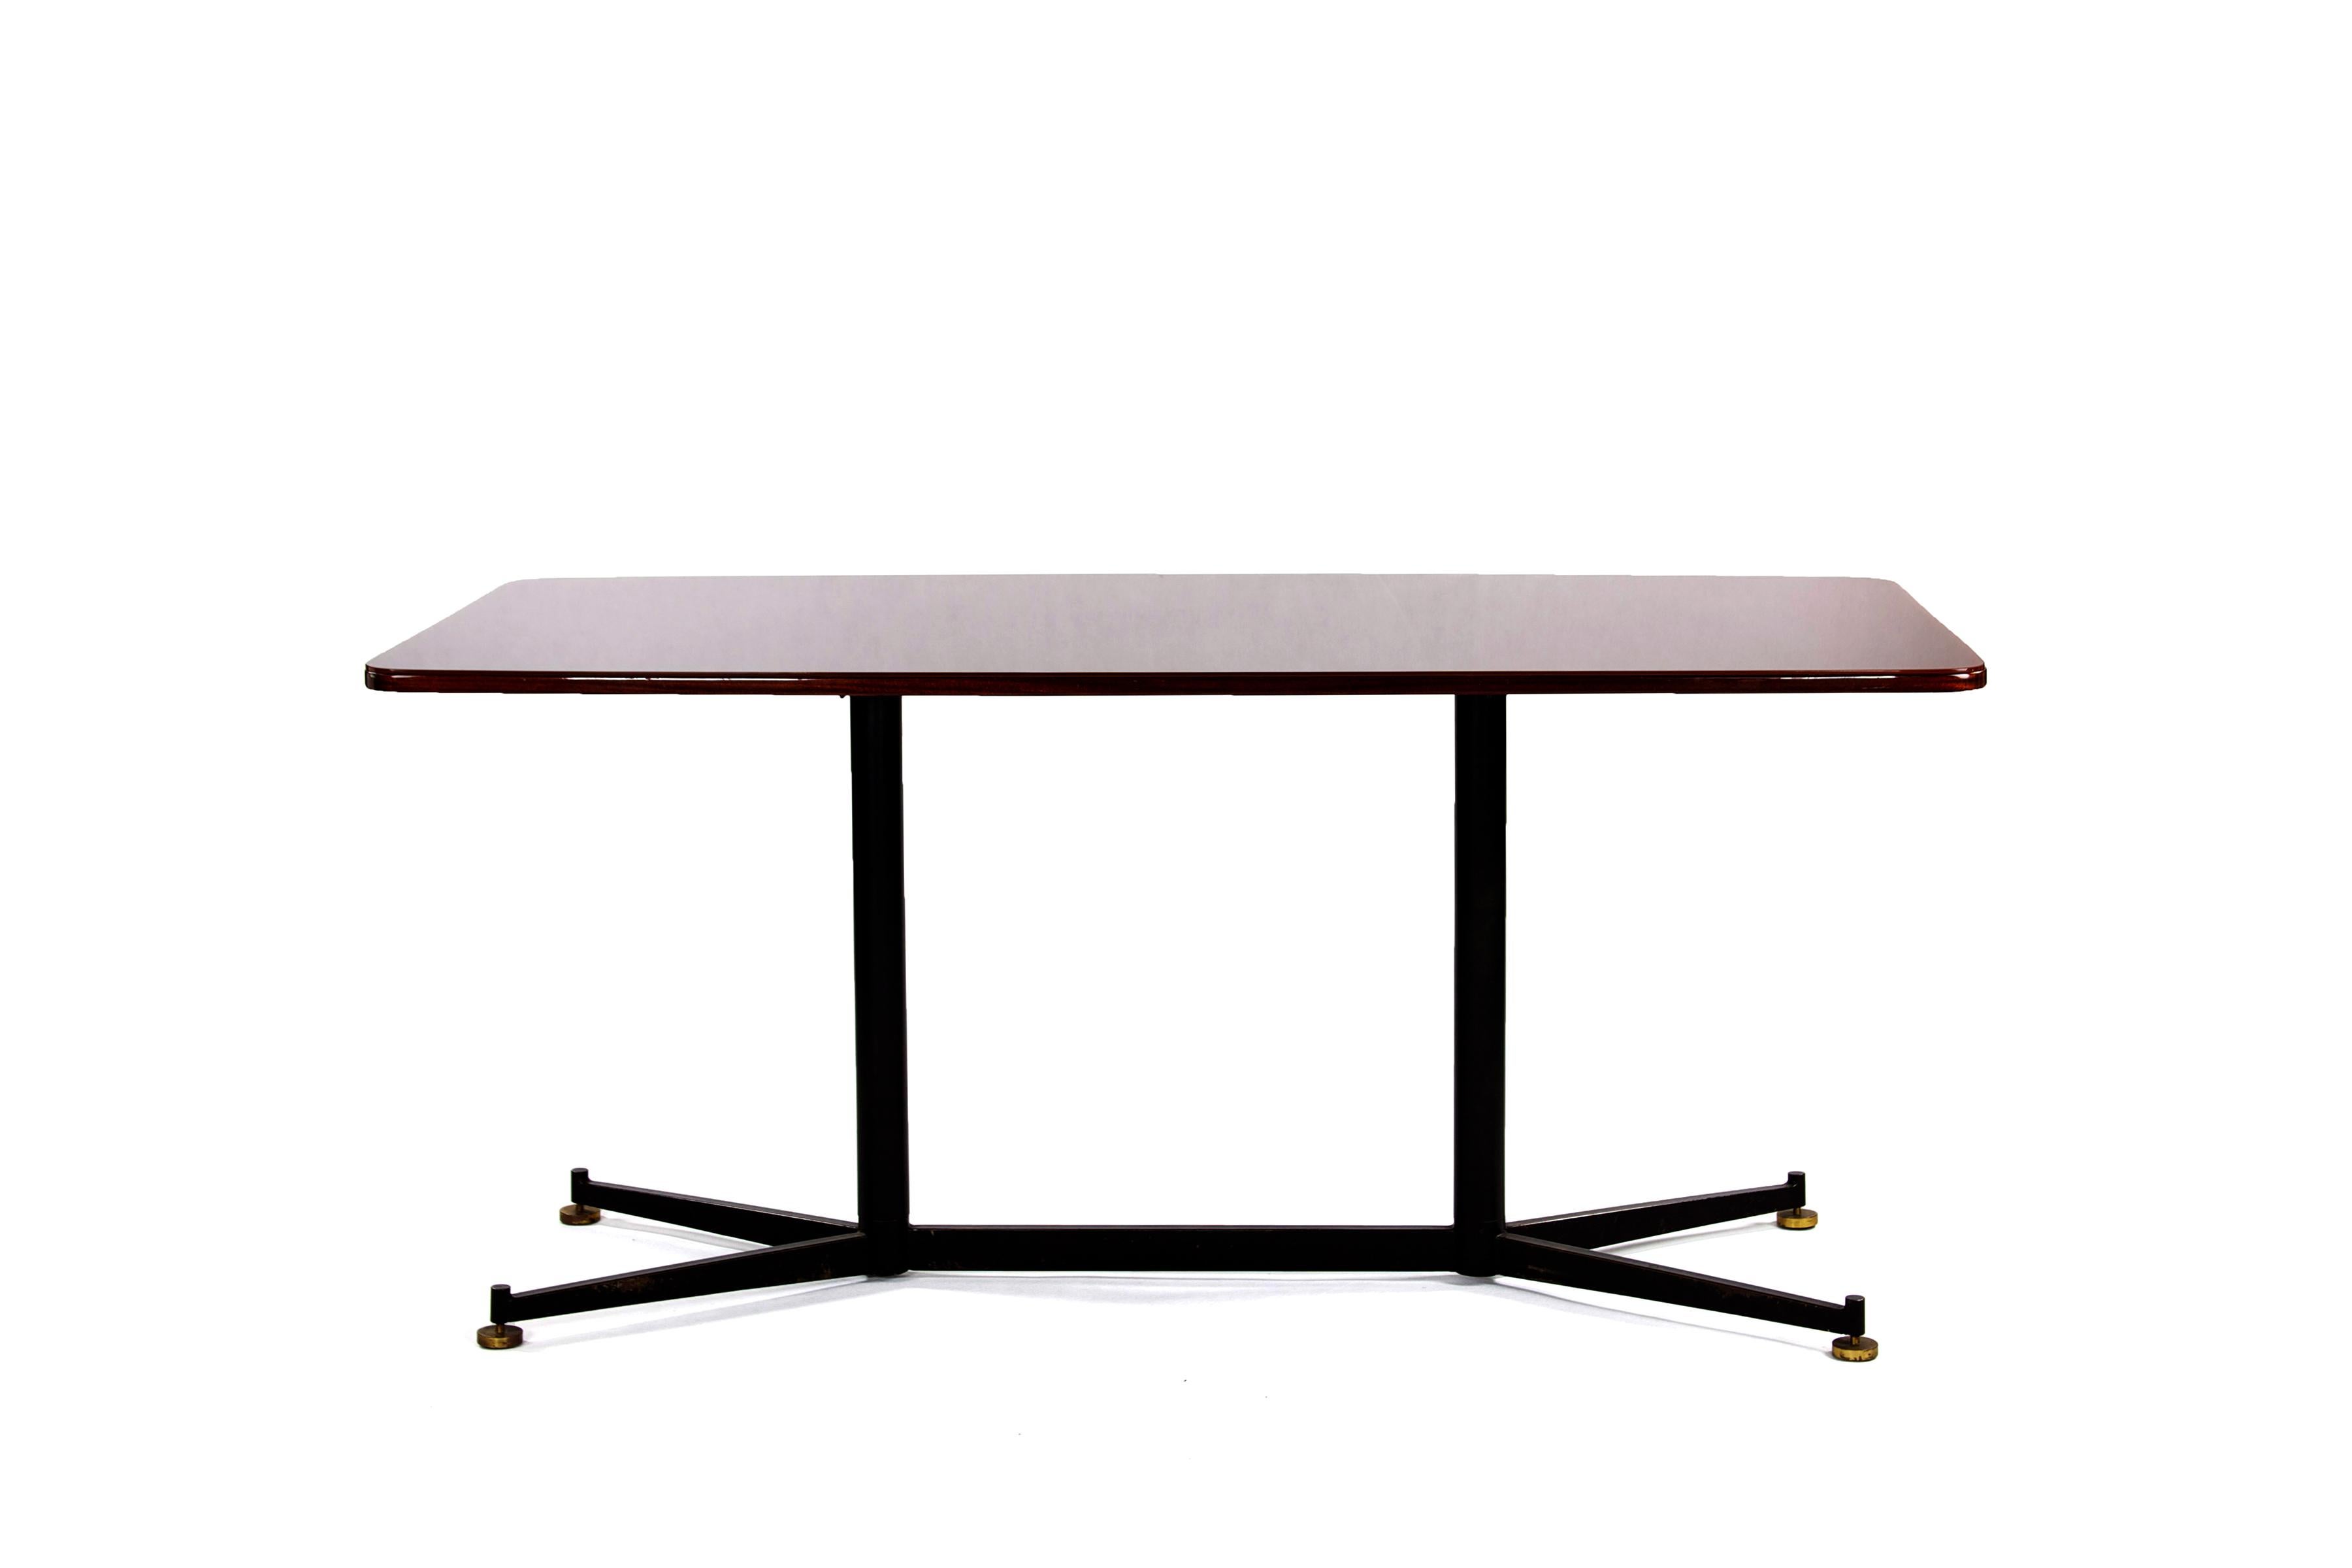 Mid-20th Century Italian Dining Rosewood Table with Black Steel Legs and Glass Top, 1950s